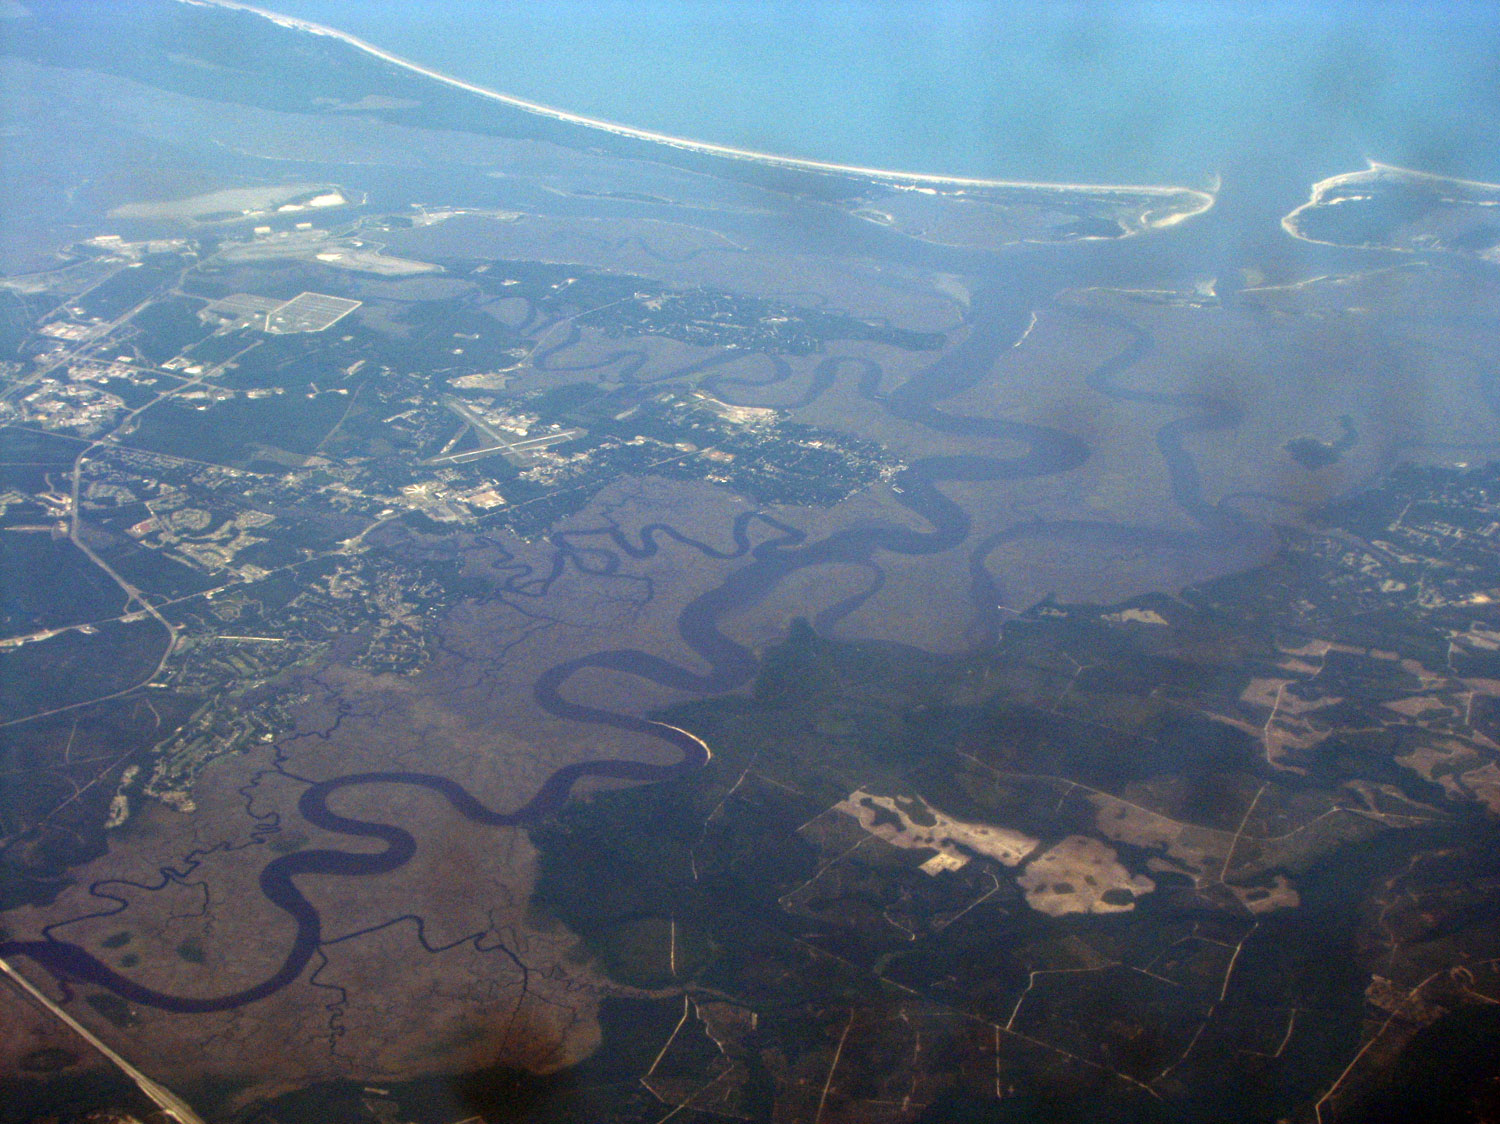 River emptying into the Atlantic Ocean on the east coast of Florida just south of Jacksonville